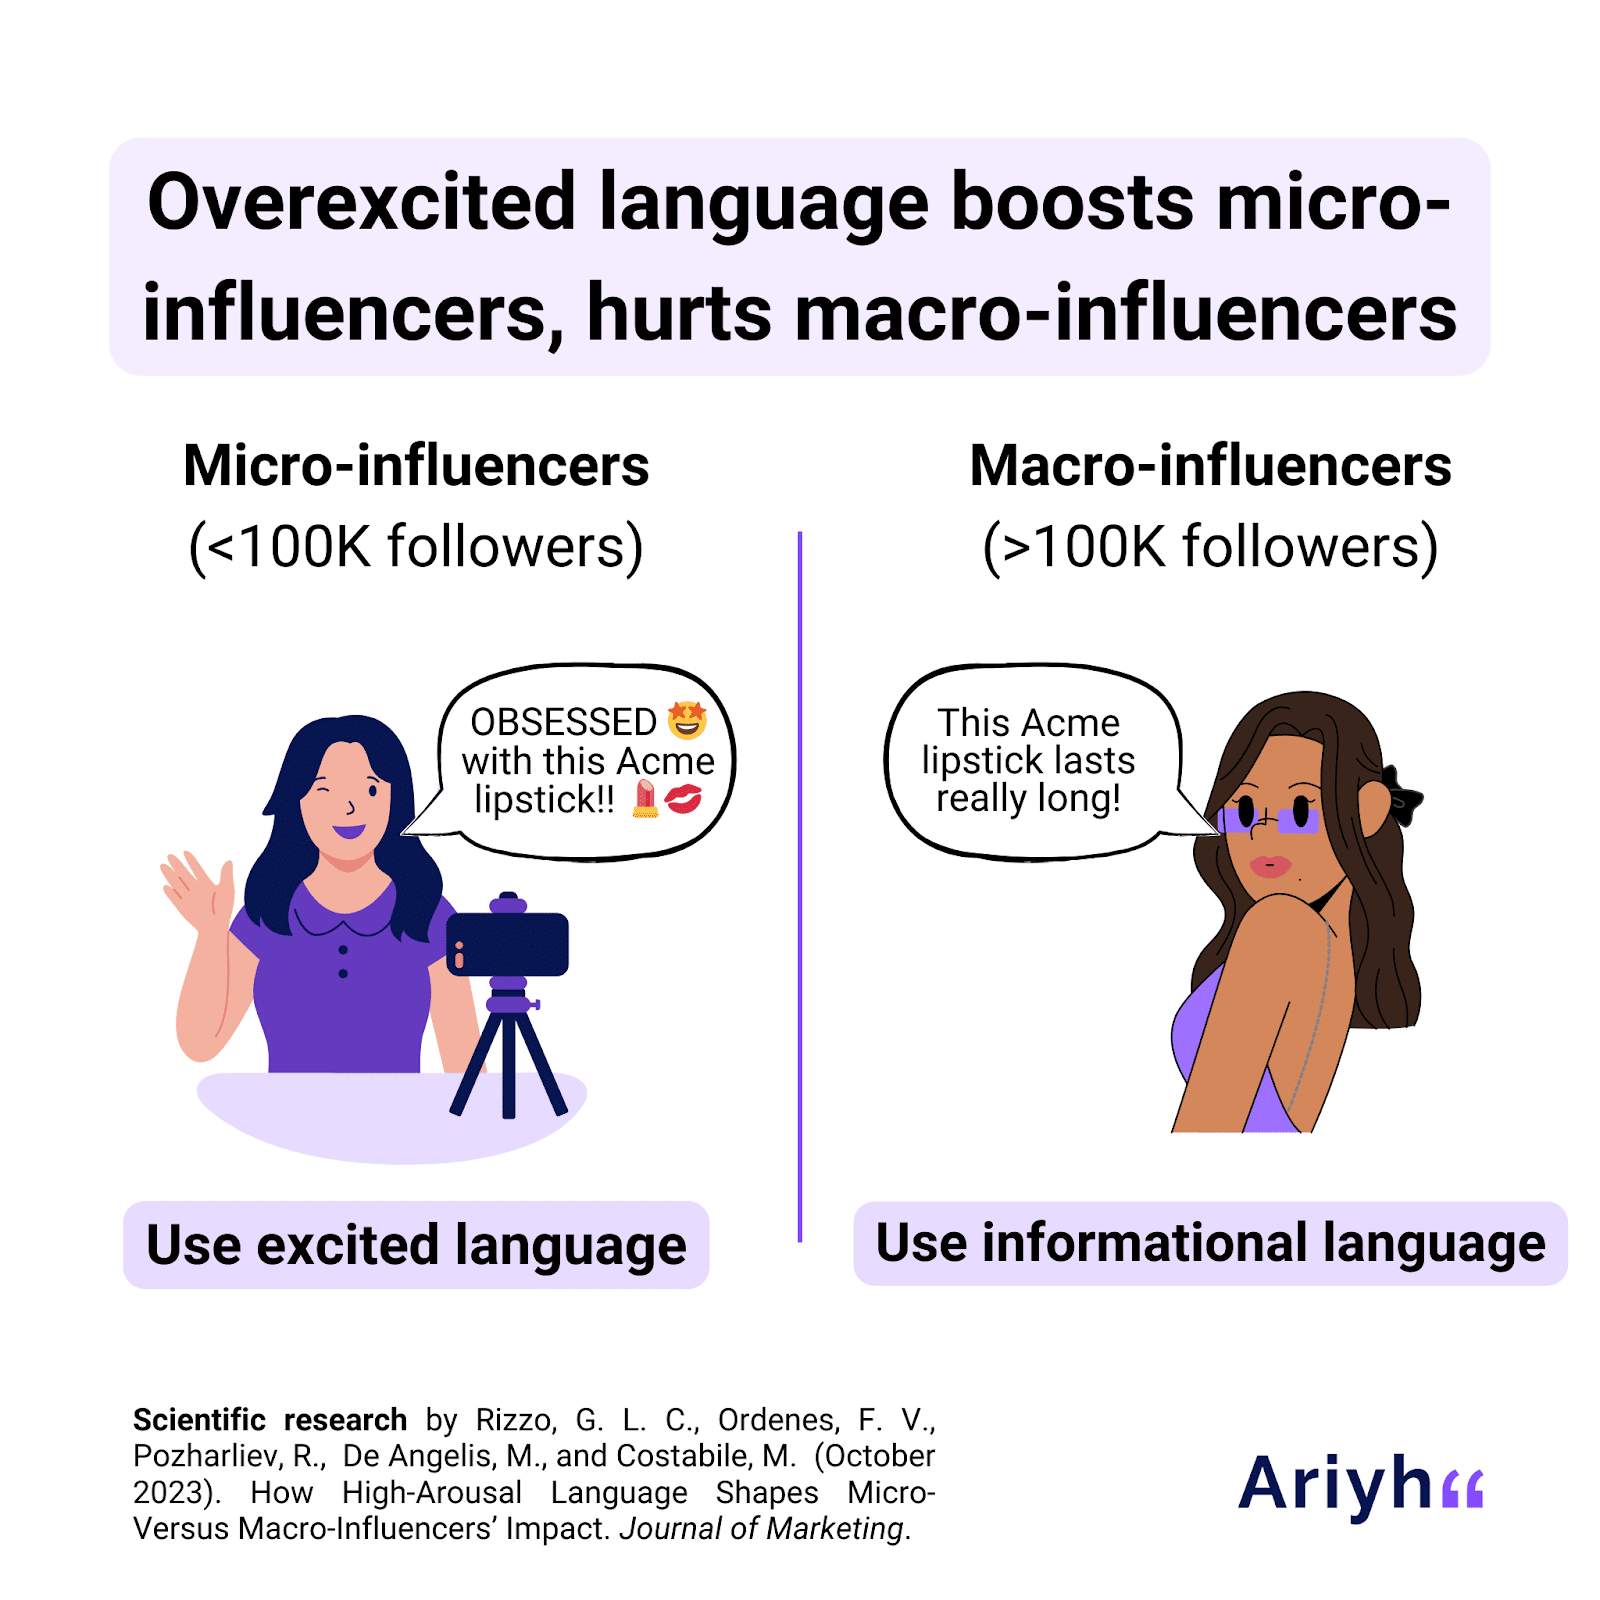 Illustrative comparison of micro and macro-influencers based on their follower counts and engagement levels, referencing a scientific journal.